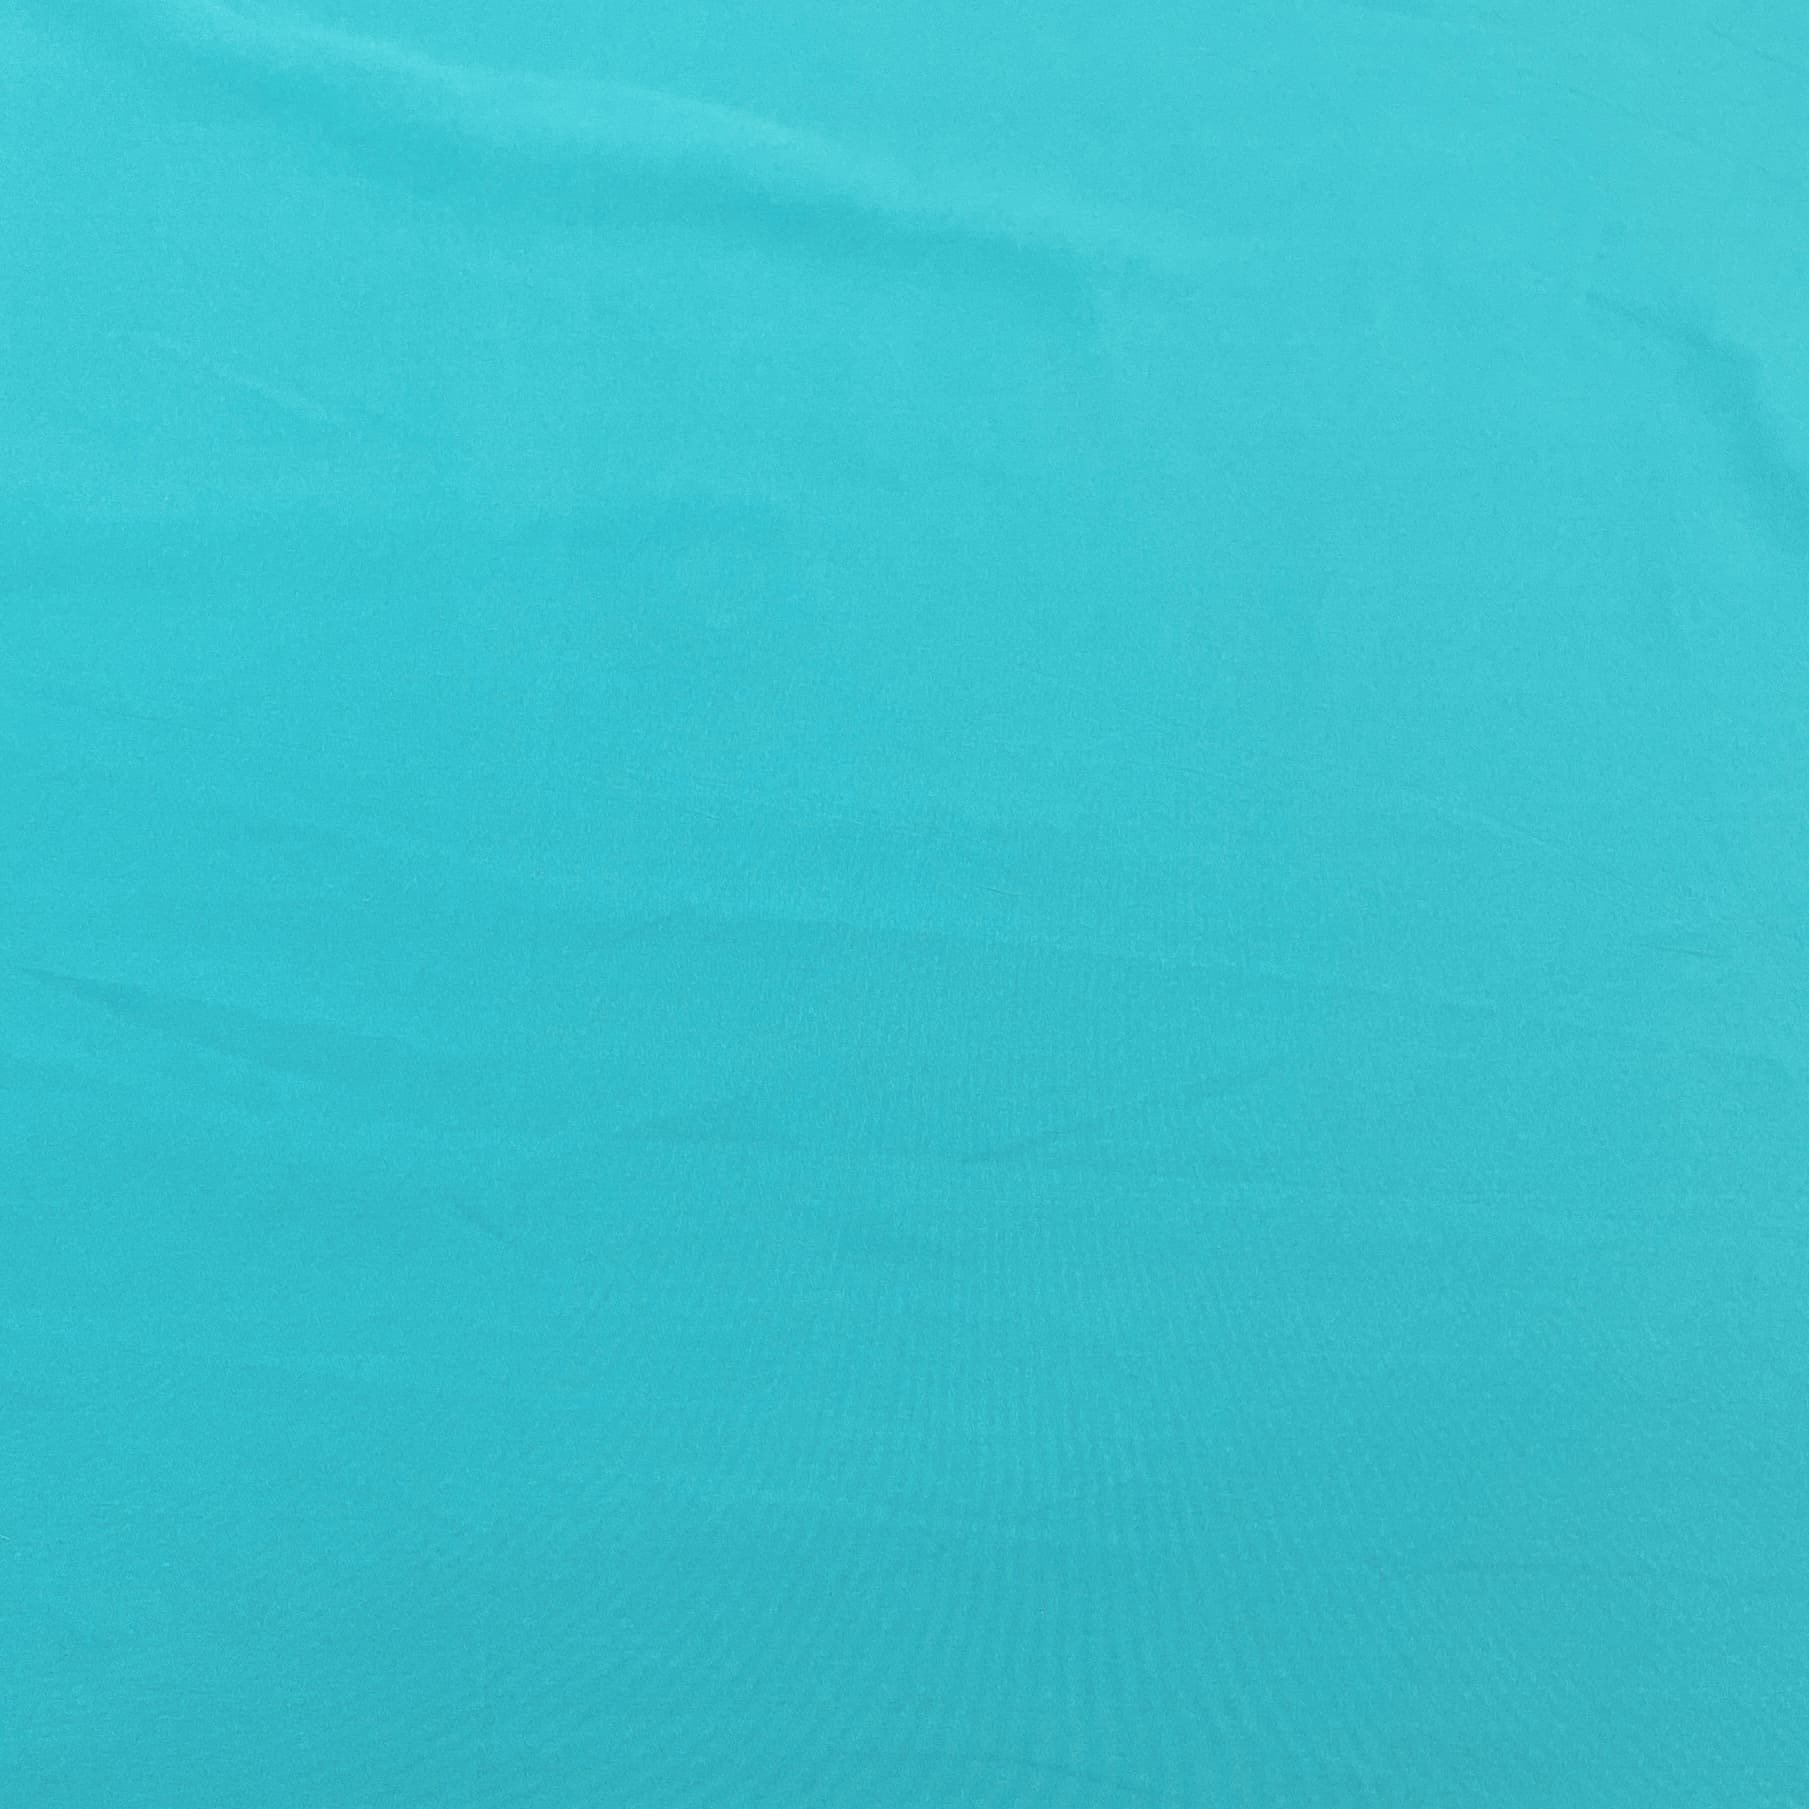 Exclusive Turquoise Green Solid Malai Crepe Fabric